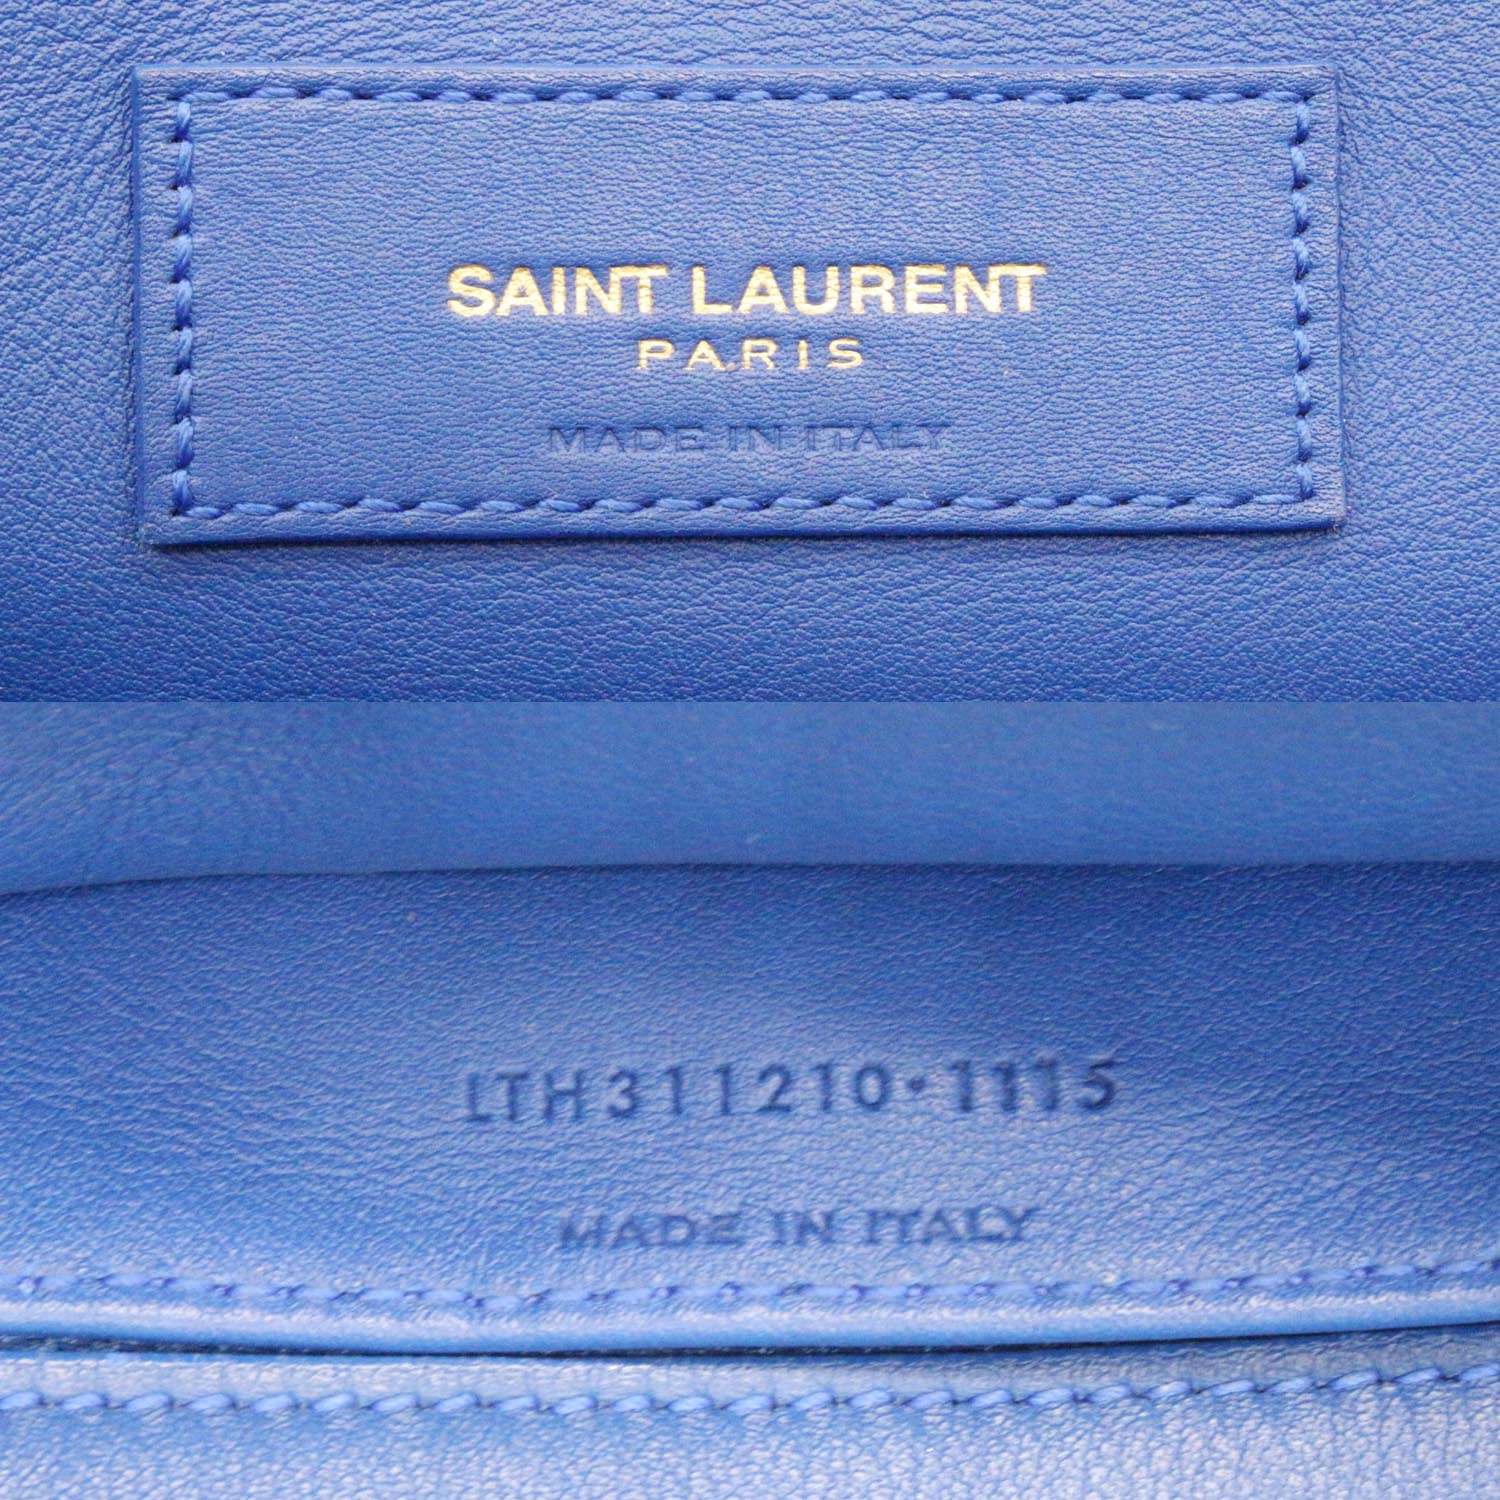 Saint Laurent - Large Leather Shopping Tote - Women - Calf Leather/Leather - One Size - Blue